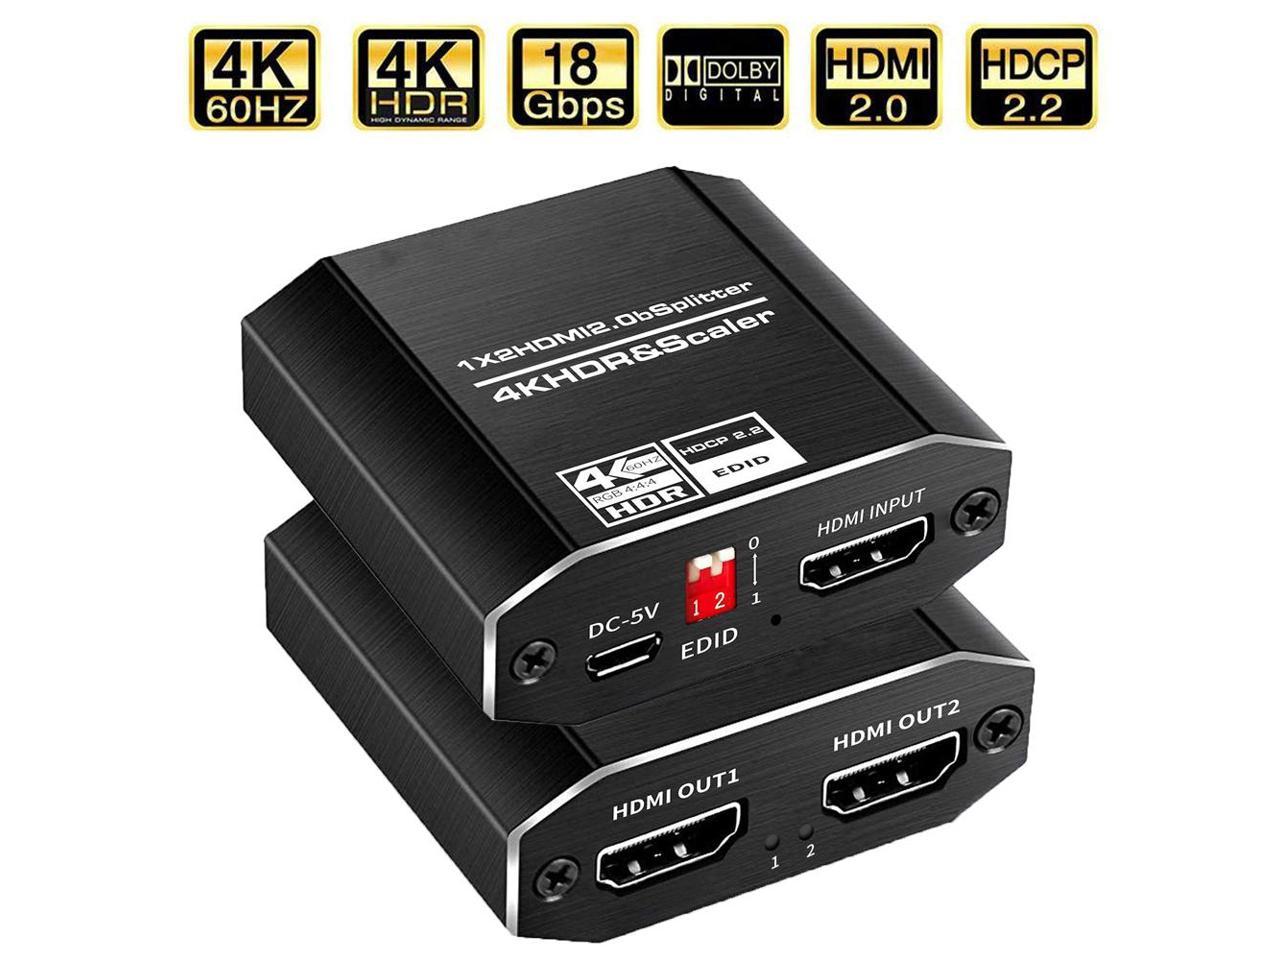 1x2 HDMI Splitter,AUBEAMTO HDMI HDCP 2.2,4K@60Hz 1x2HDMI Splitter.support Scaler(one Out 4K@60Hz,Another Out 1080P),RGB 4:4:4,4 kinds of EDID mode,HDR 10 . - Newegg.com